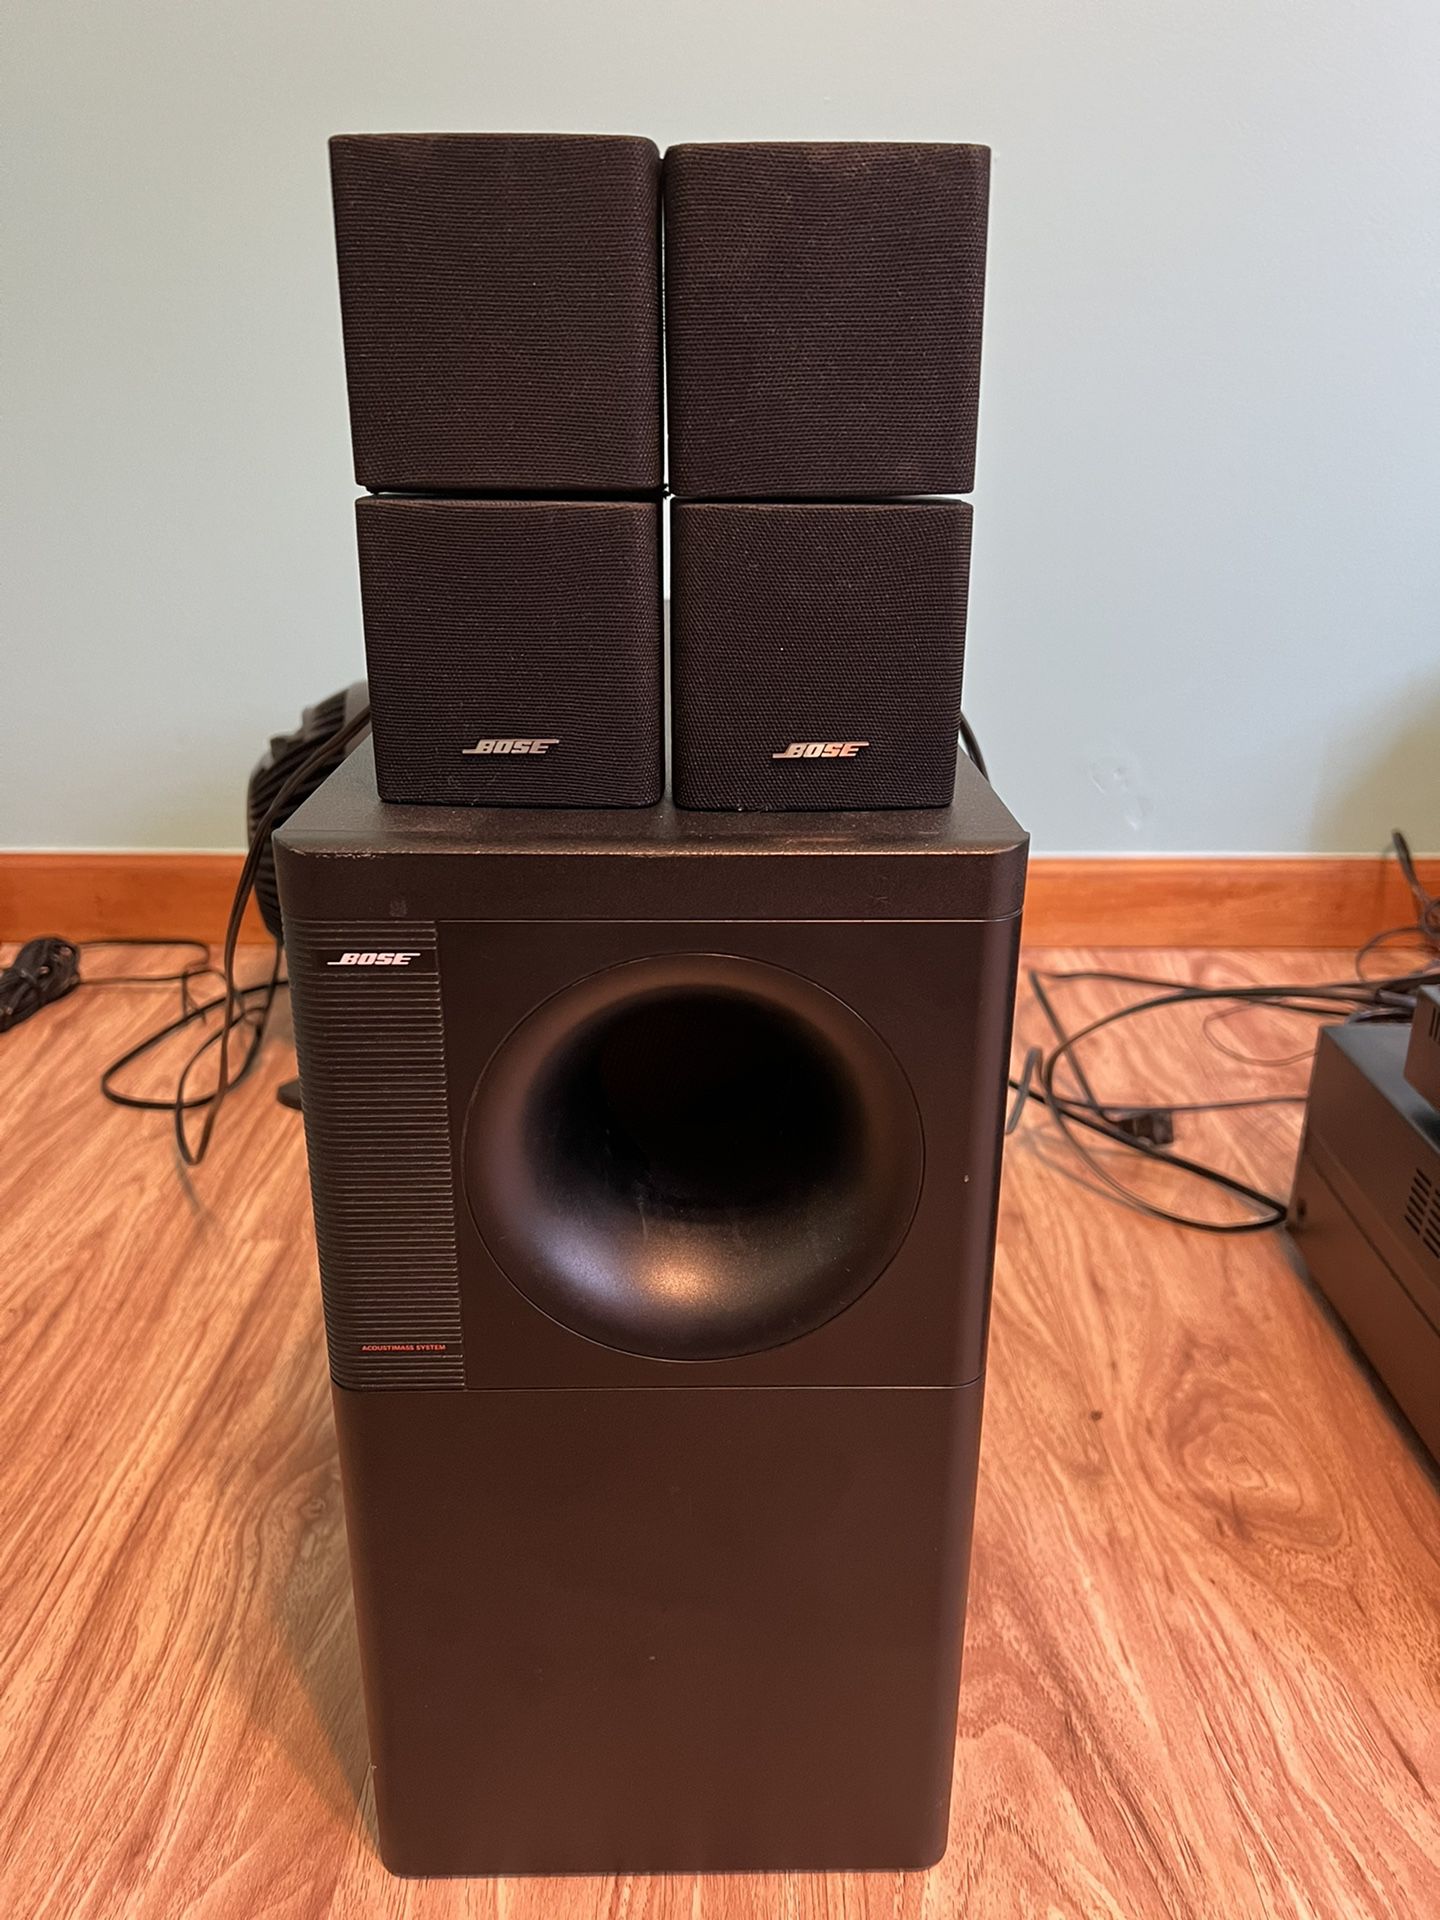 Bose Series 3 2 Cube Speakers Sub and Kenwood  Receiver And  blueray Player